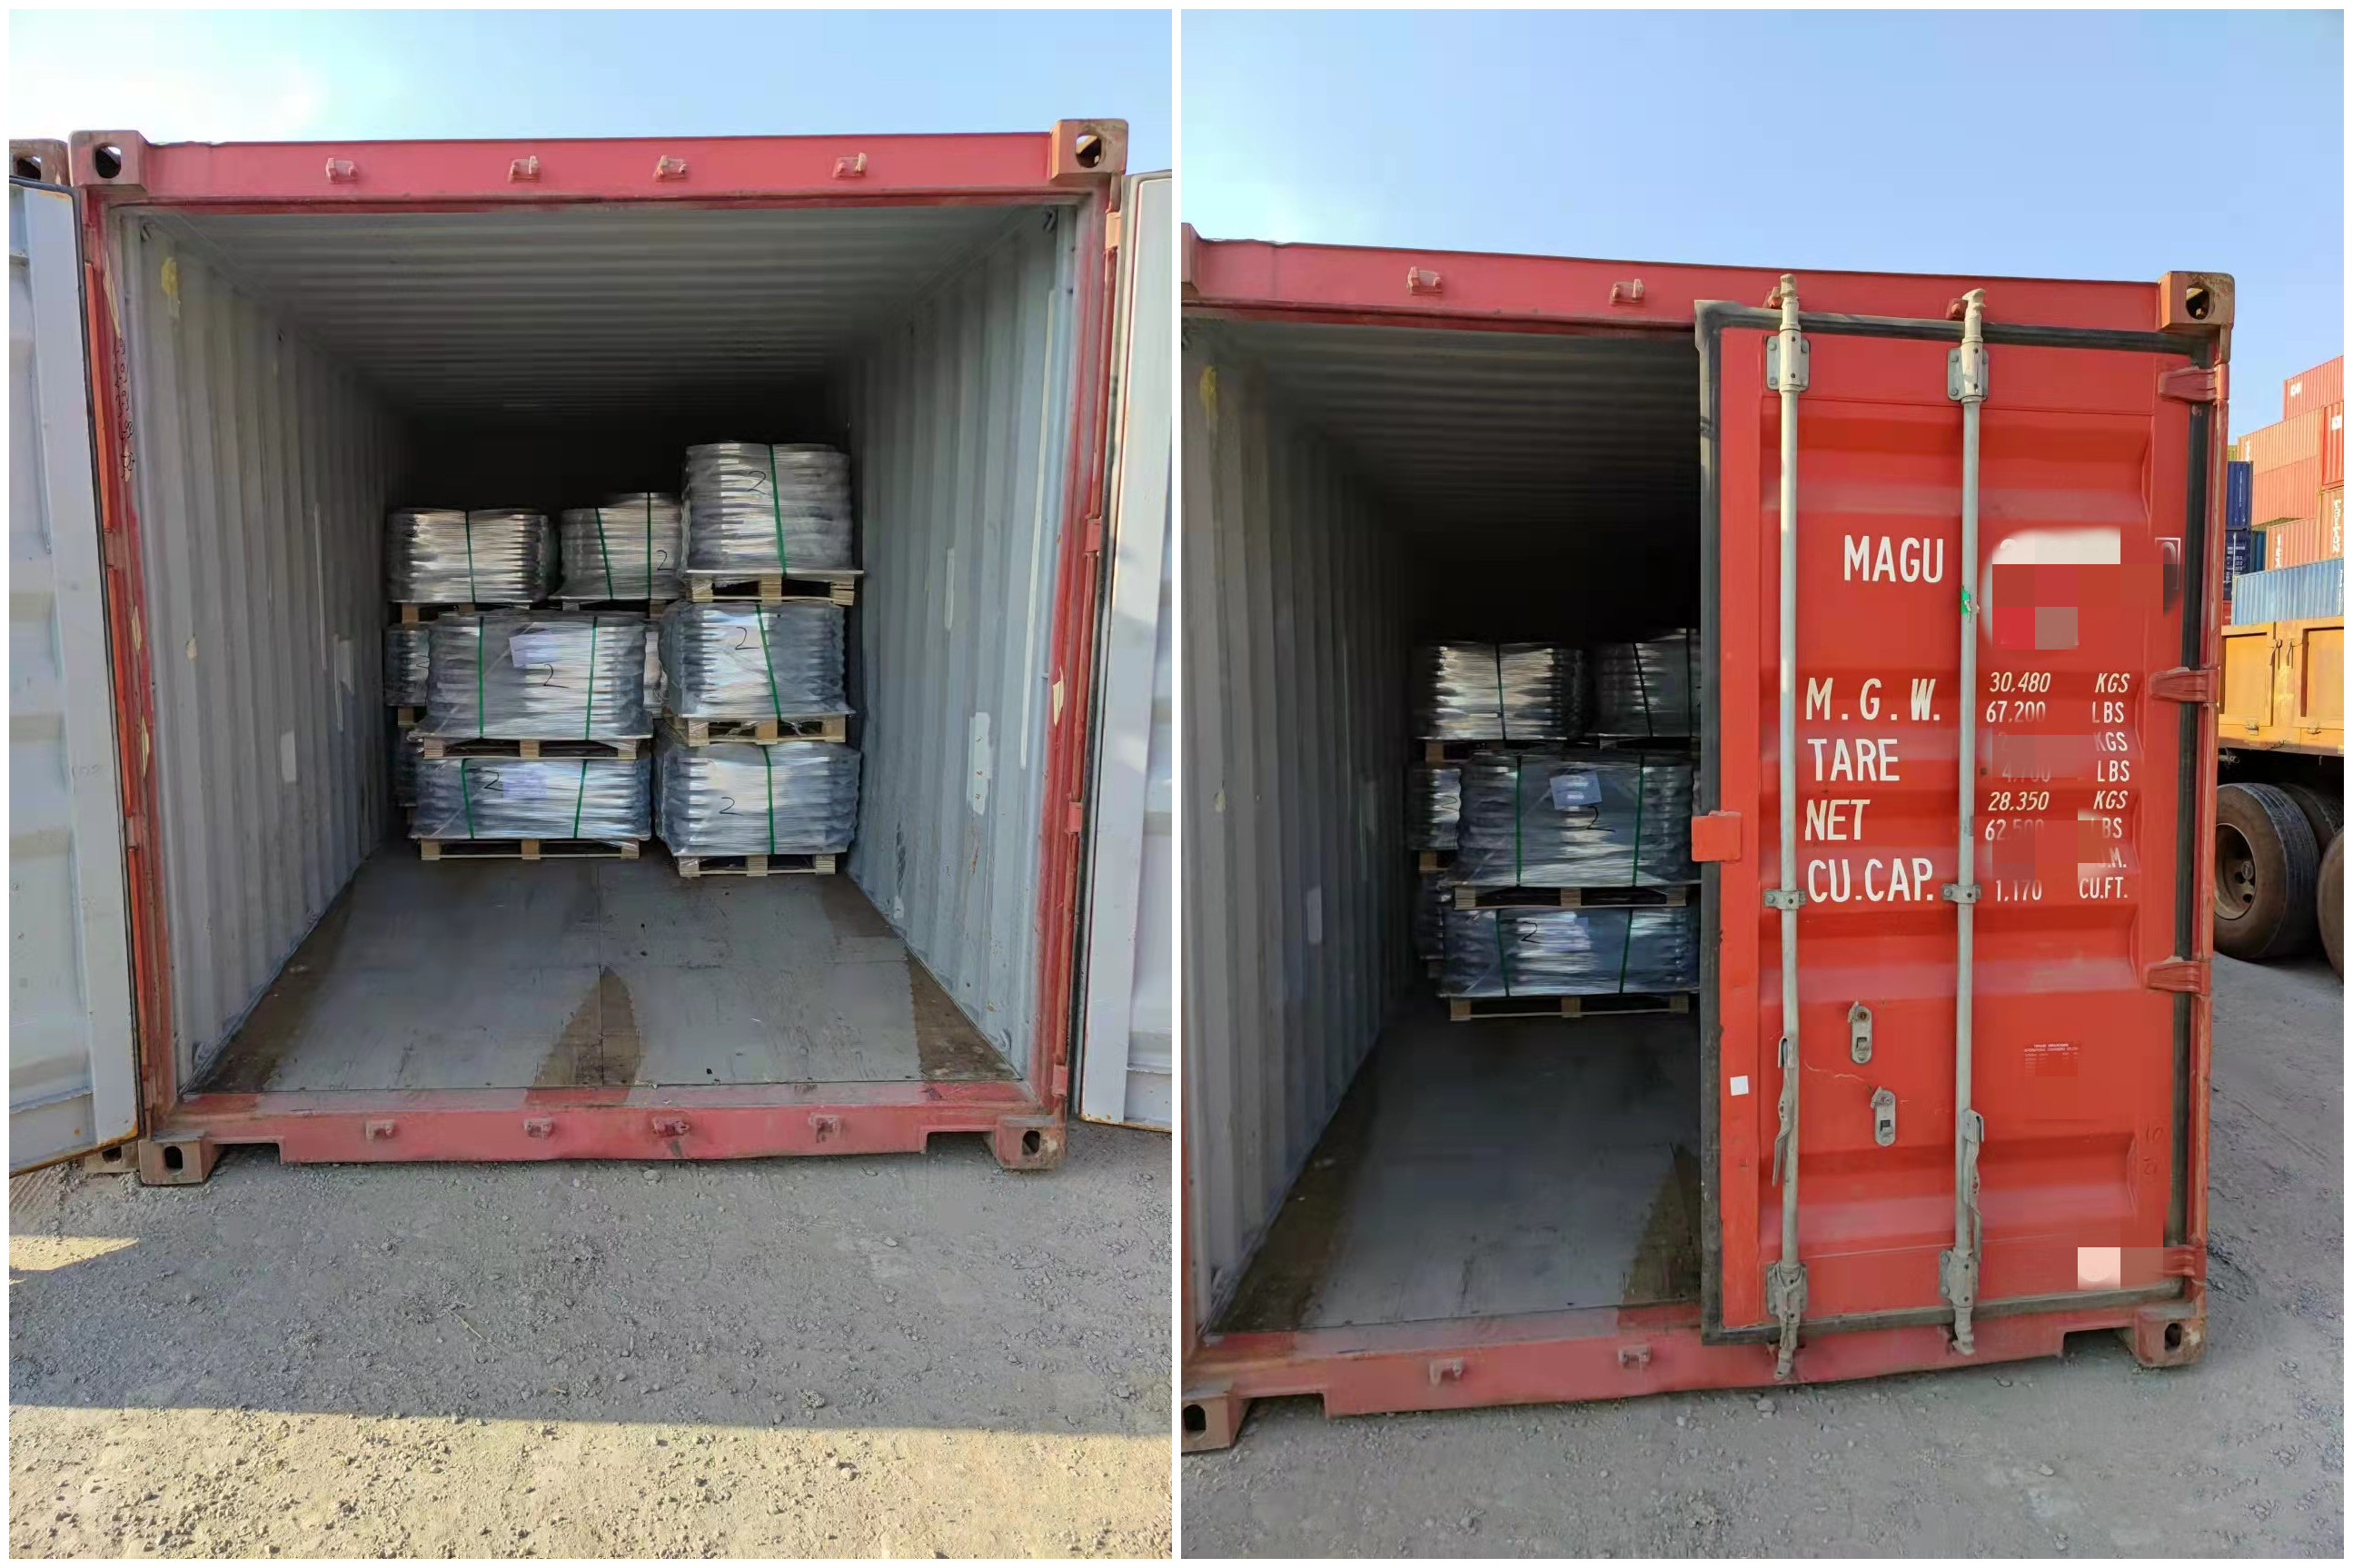 2 containers shipped to the port of Santos, Brazil today! #SLIP ON FLANGE ASME B16.5 150#  8